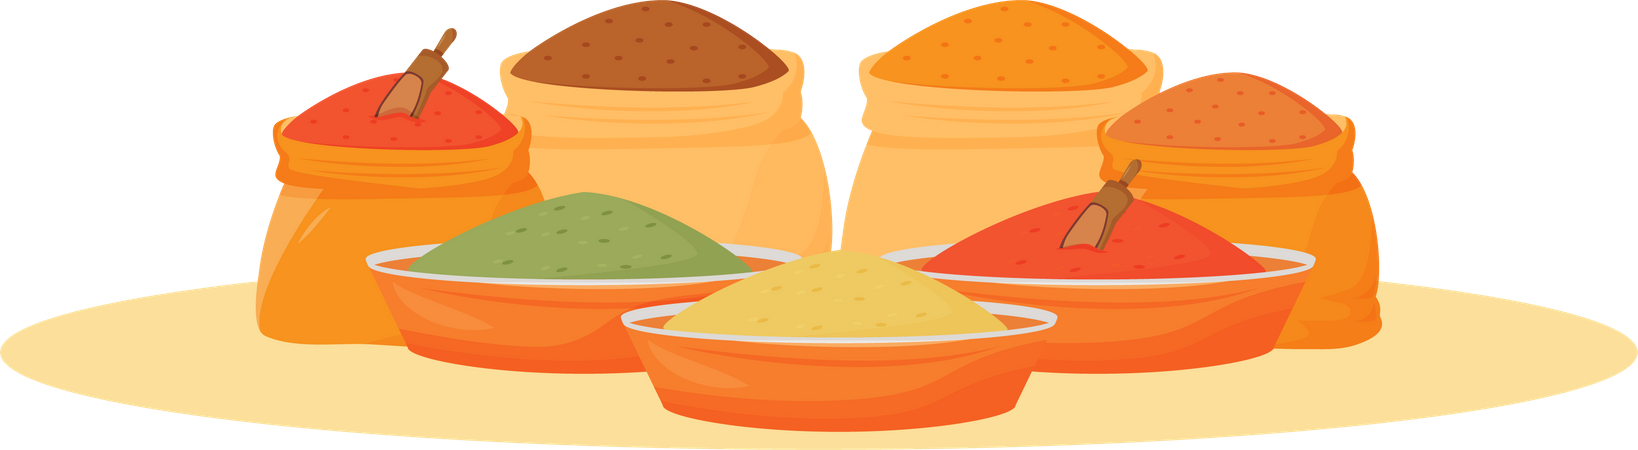 Indian spices assortment Illustration